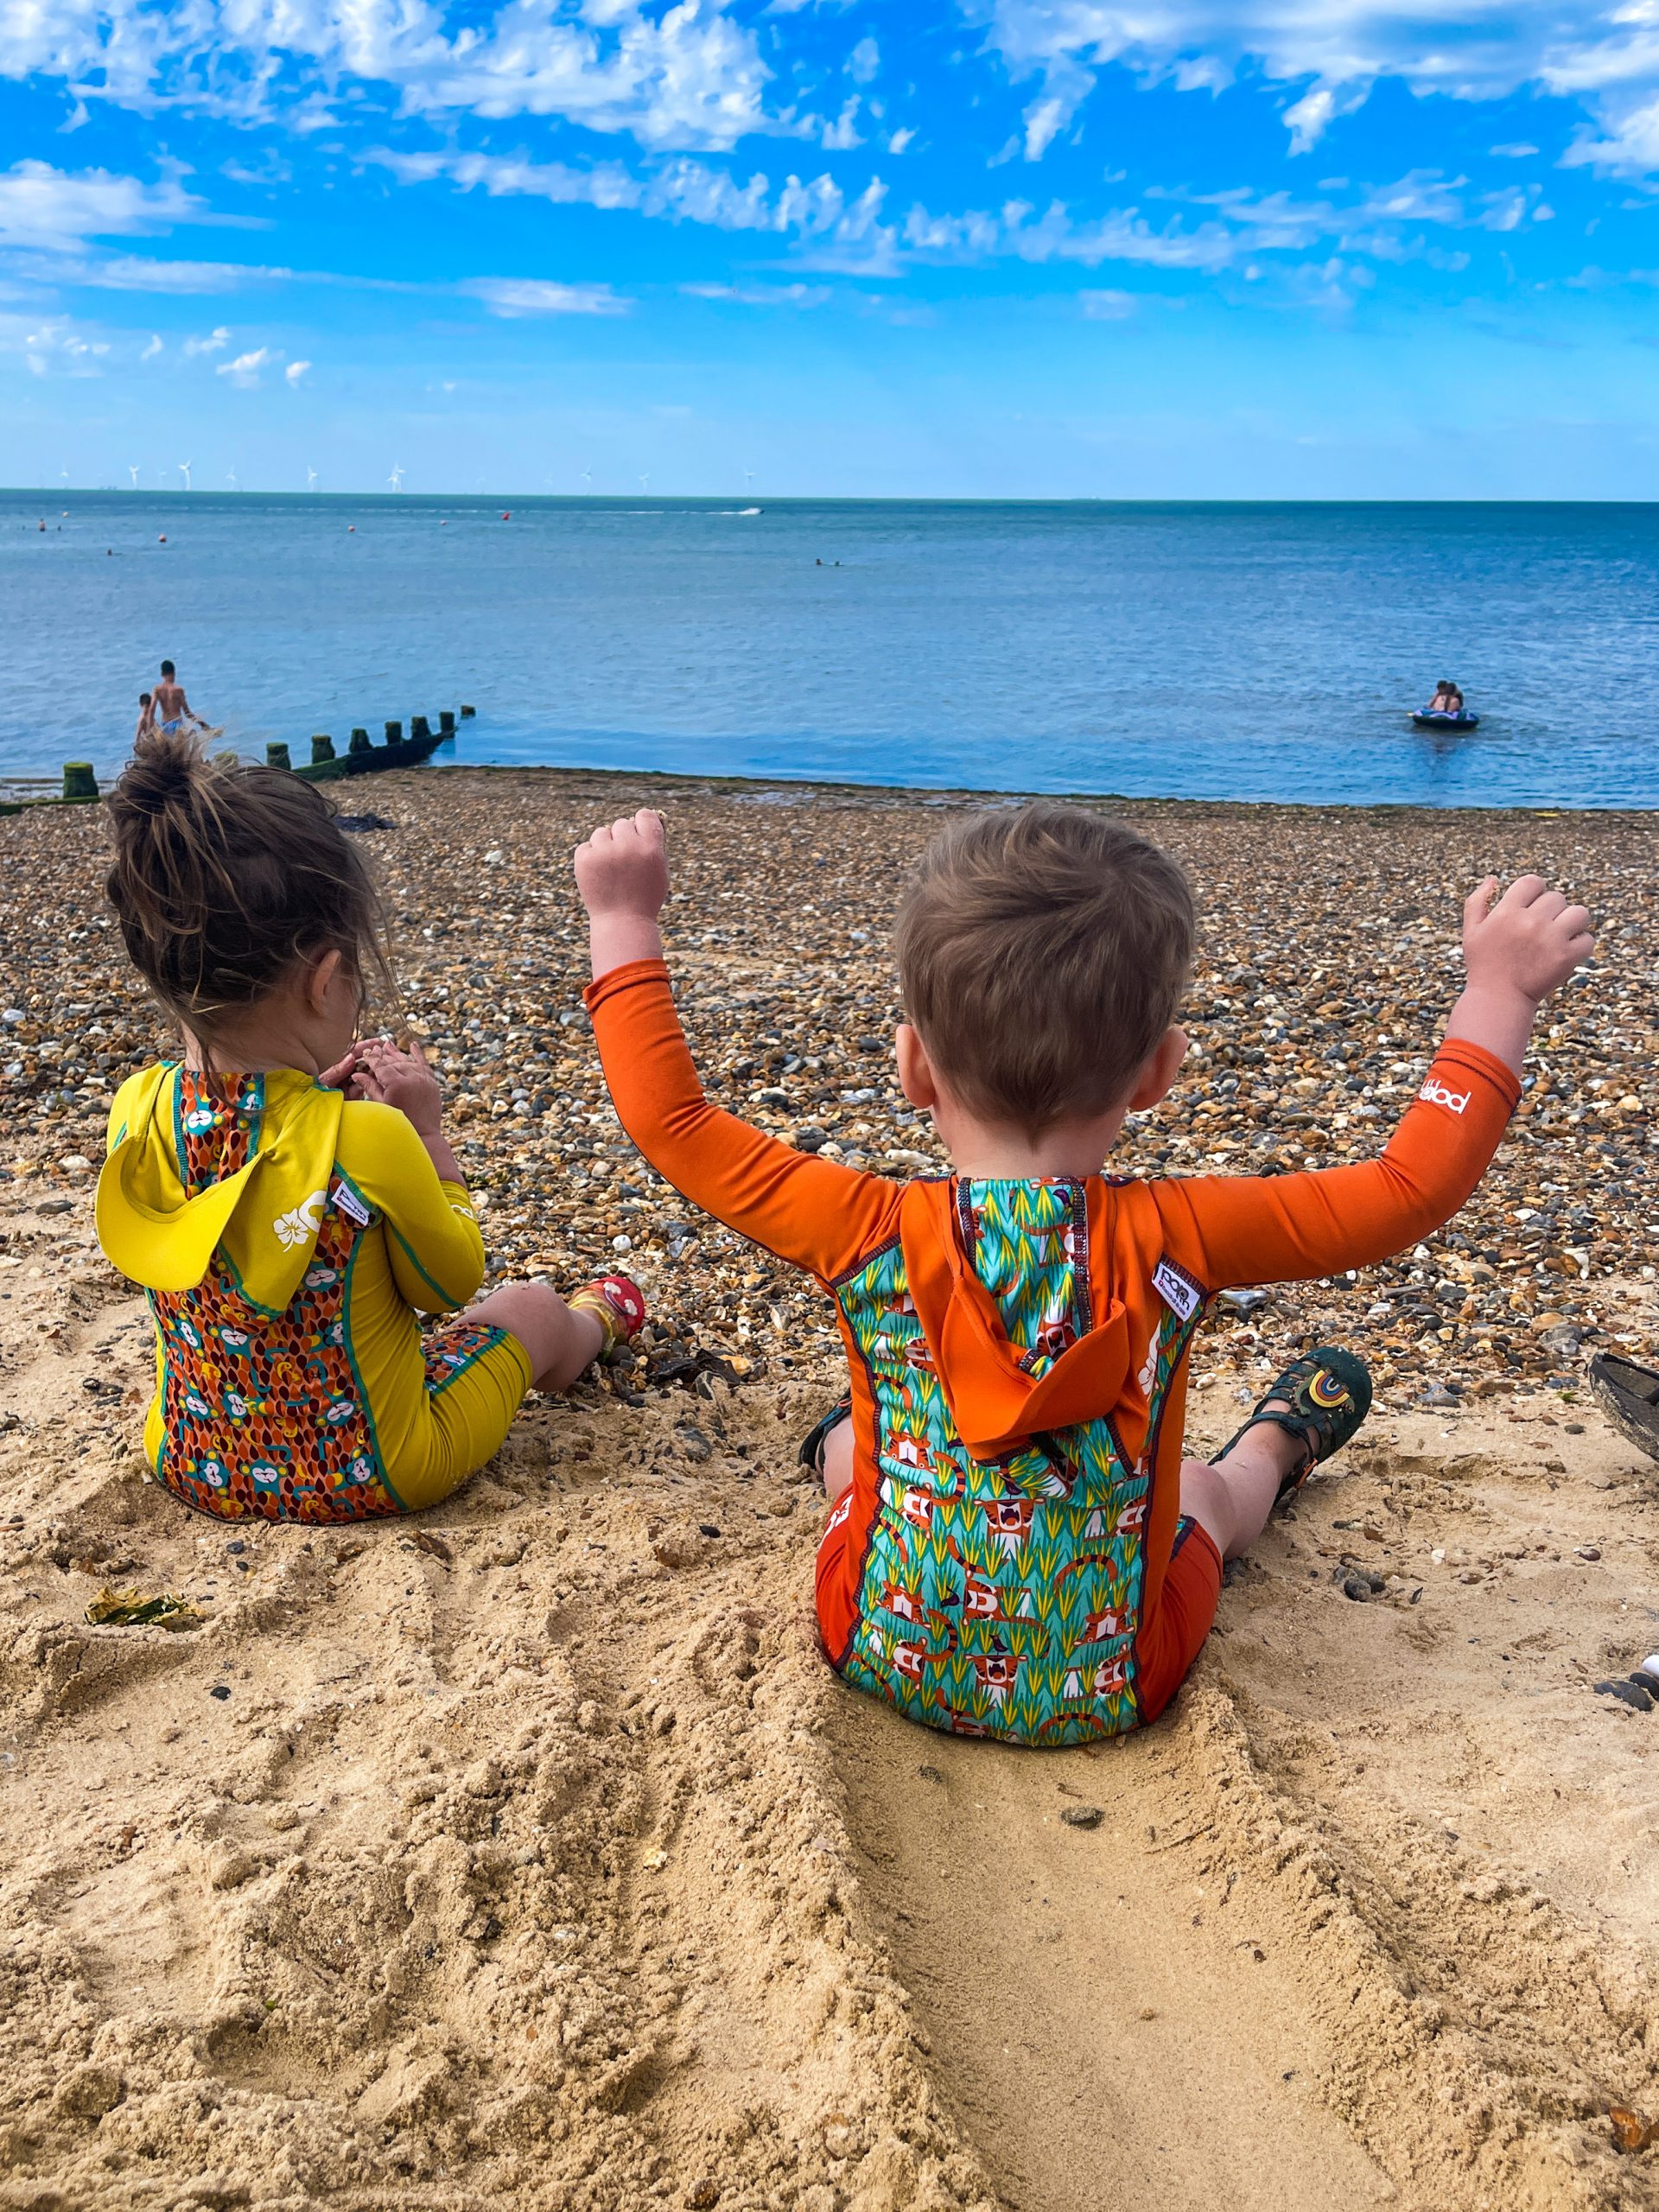 A beach day with the twins – with no sensory overload! - Eco